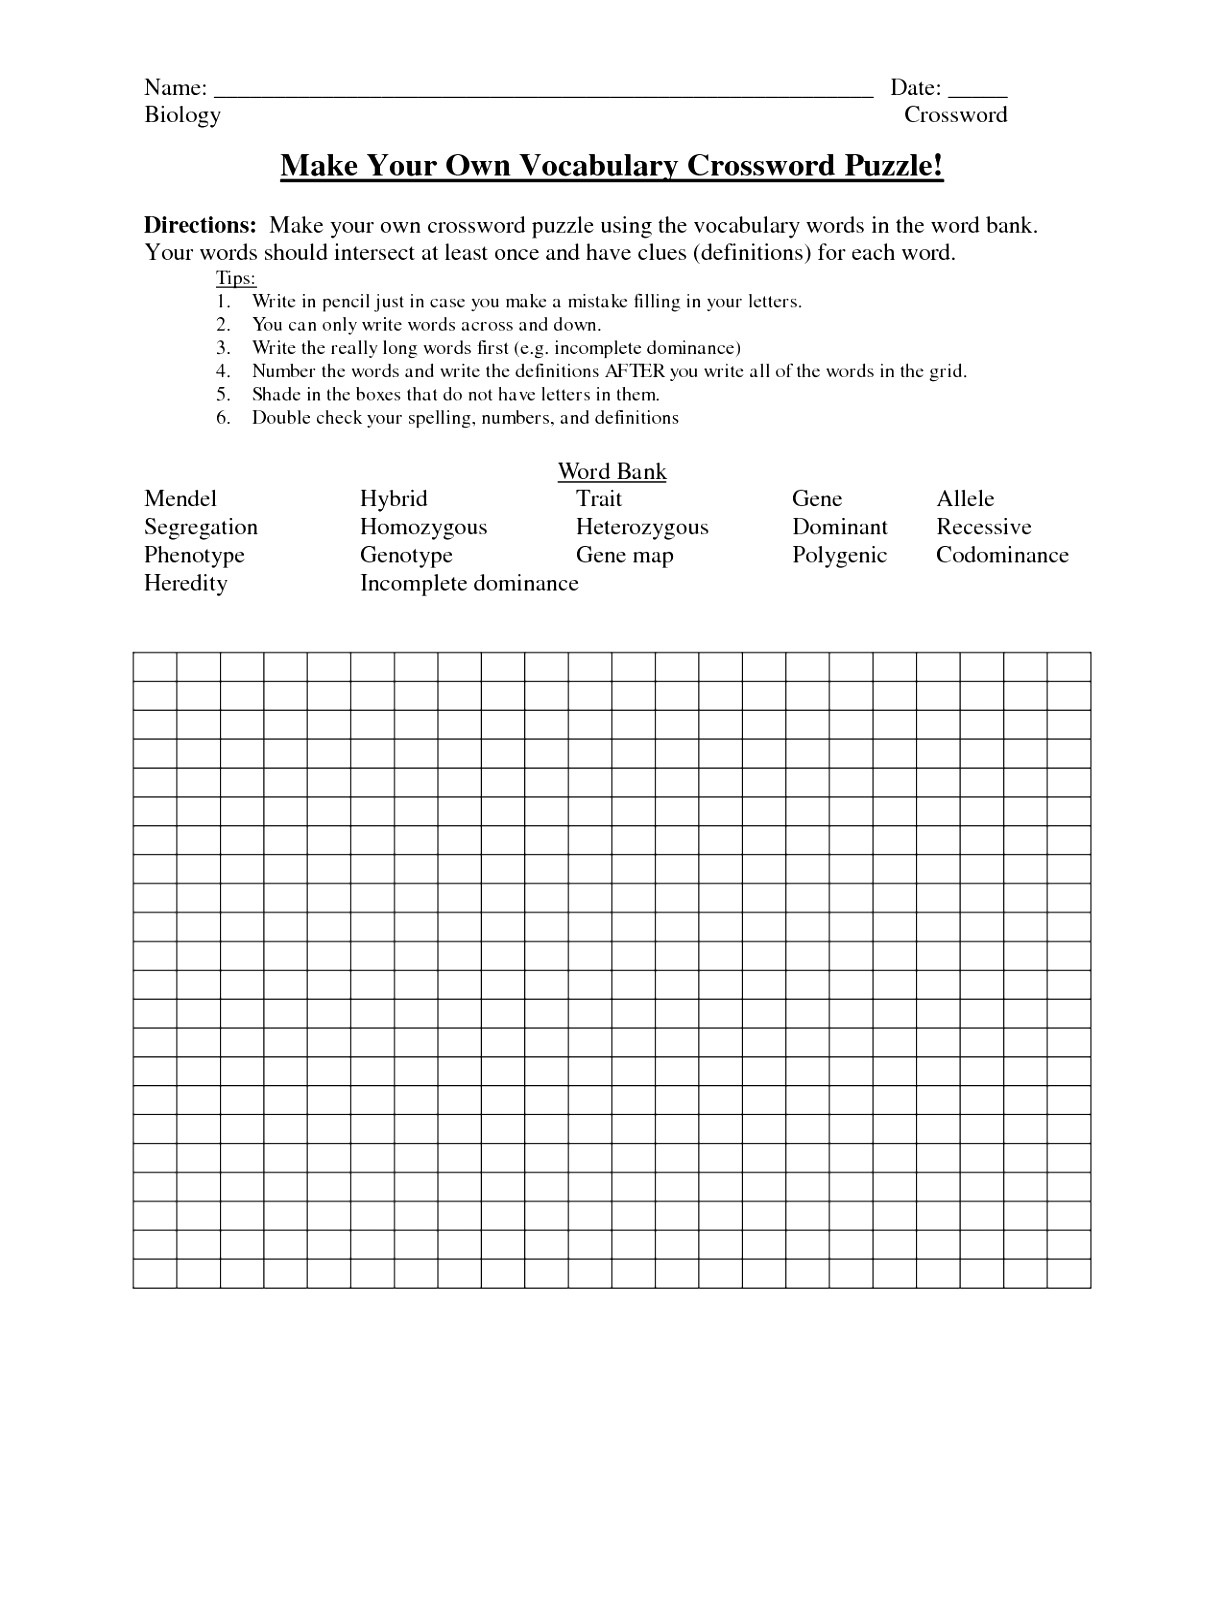 create your own word search template